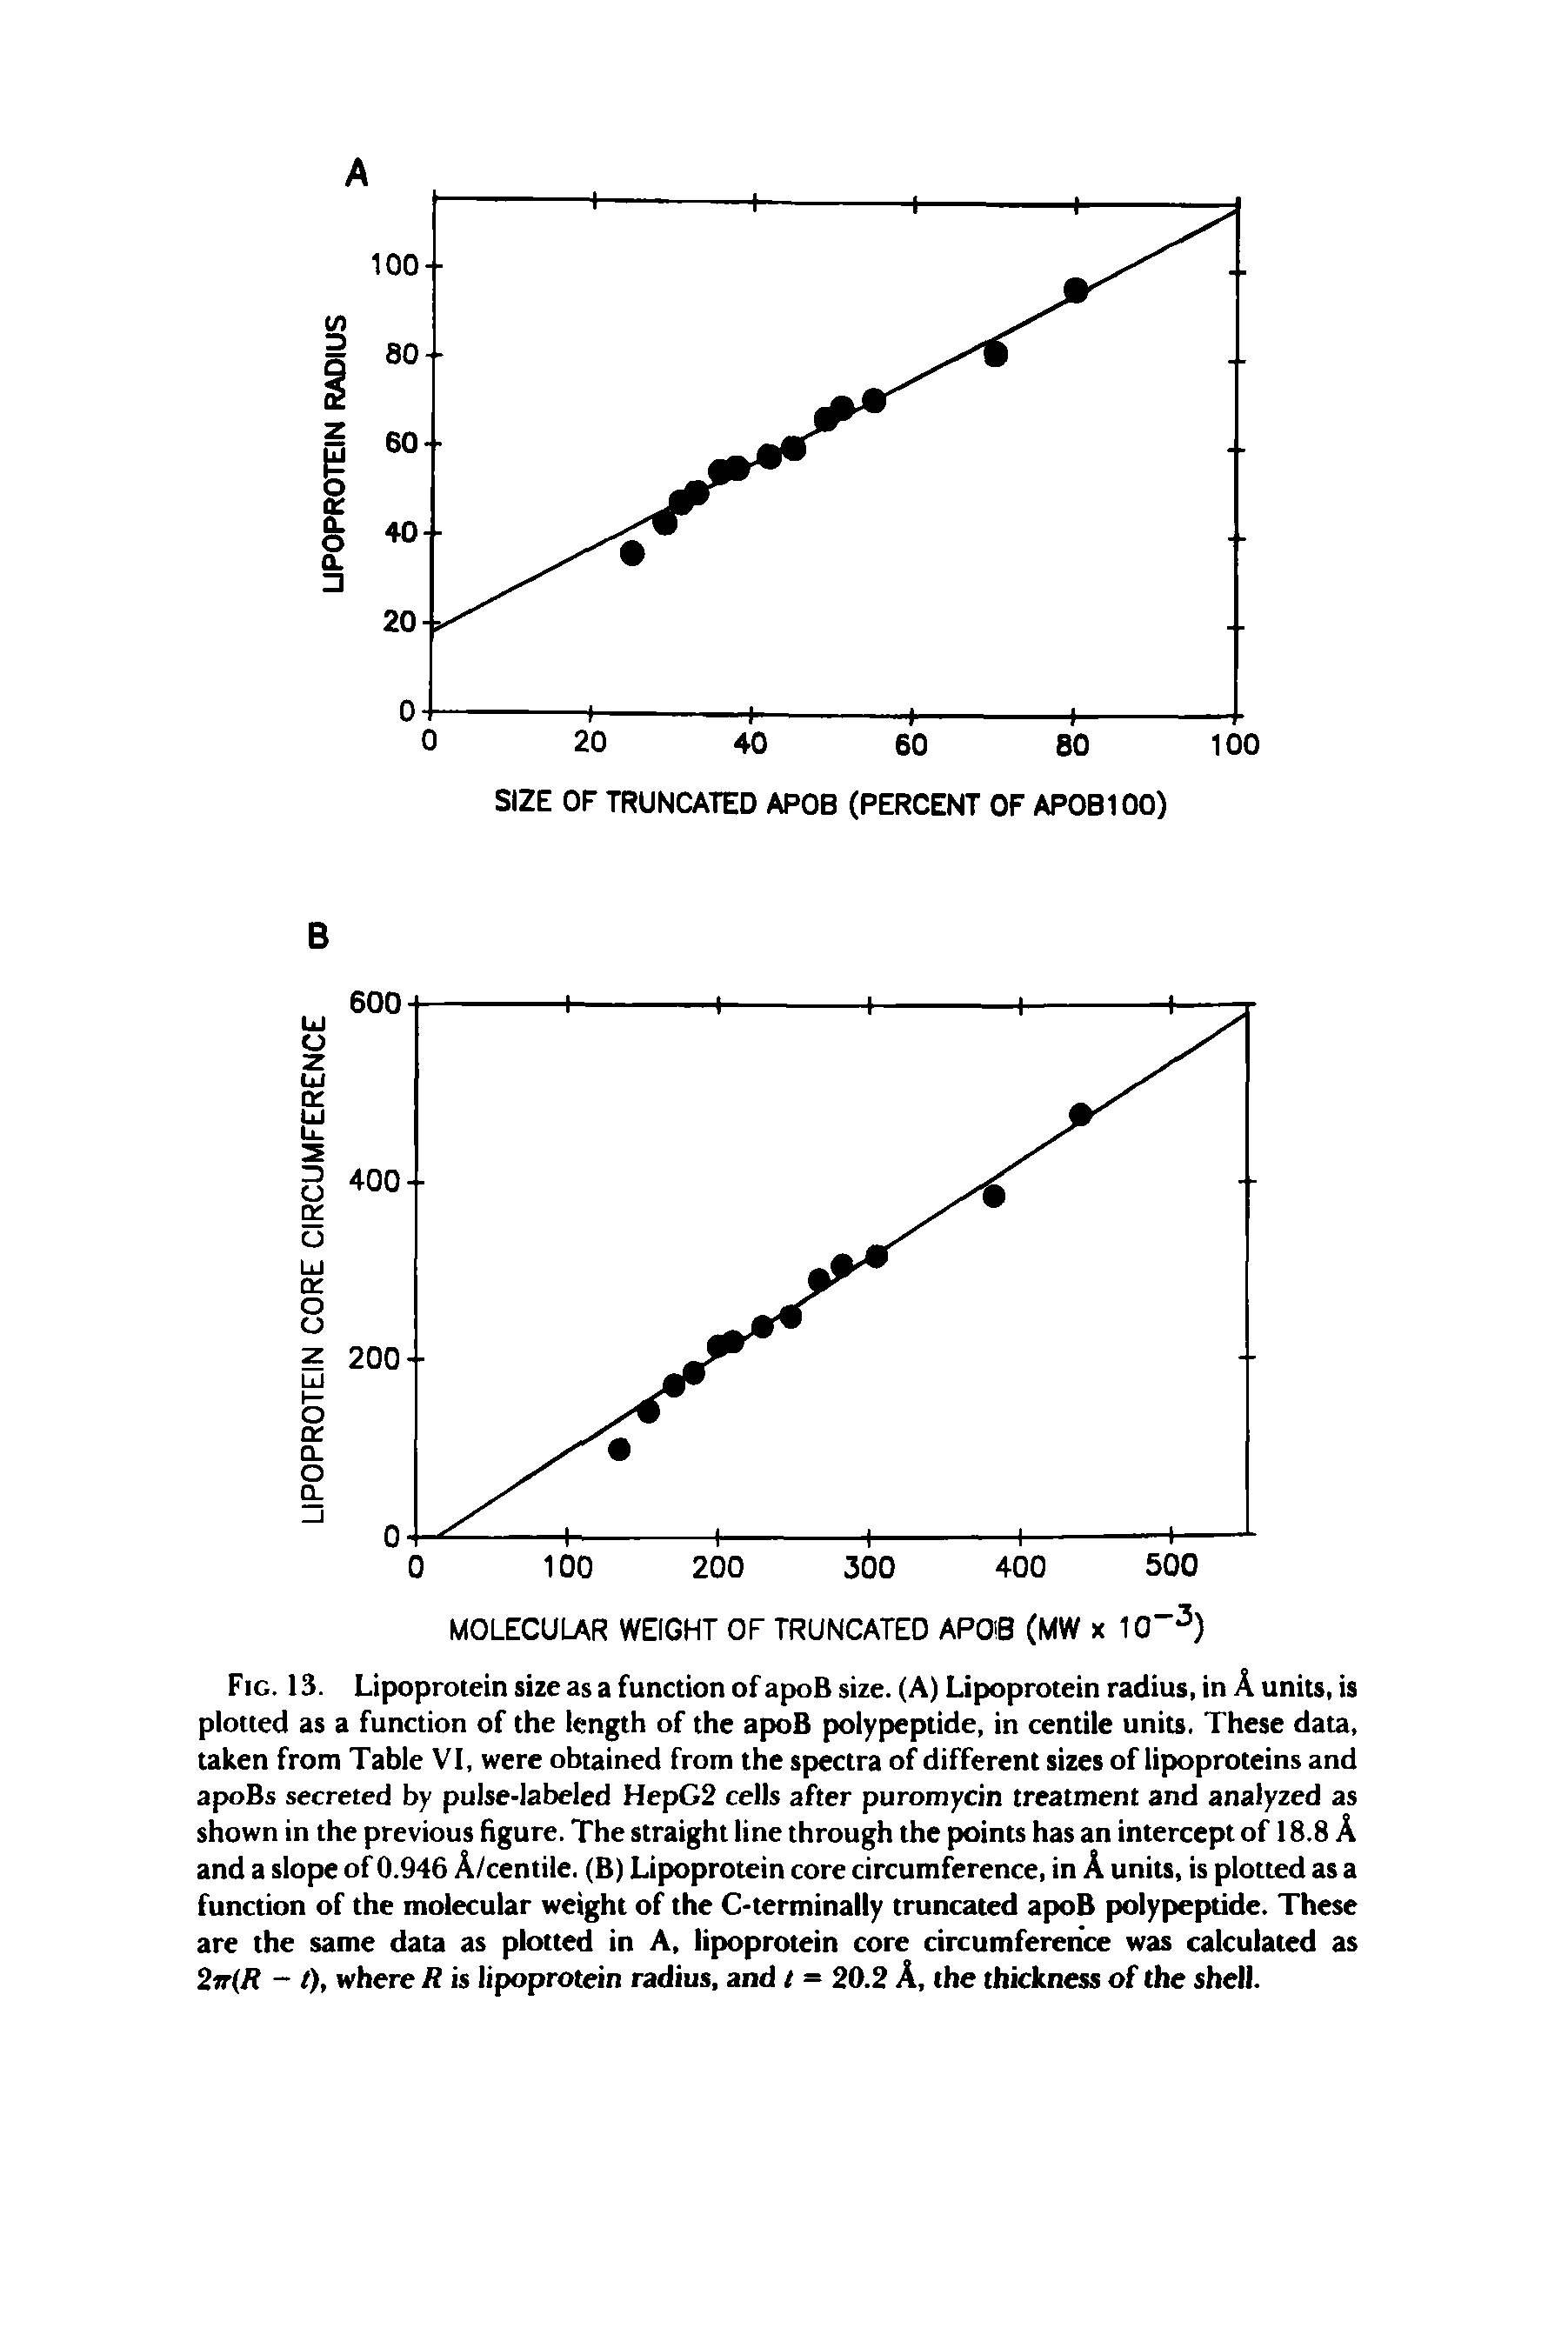 Fig. 13. Lipoprotein size as a function of apoB size. (A) Lipoprotein radius, in A units, is plotted as a function of the length of the apoB polypeptide, in centile units. These data, taken from Table VI, were obtained from the spectra of different sizes of lipoproteins and apoBs secreted by pulse-labeled HepG2 cells after puromycin treatment and analyzed as shown in the previous figure. The straight line through the points has an intercept of 18.8 A and a slope of 0.946 A/centile. (B) Lipoprotein core circumference, in A units, is plotted as a function of the molecular weight of the C-terminally truncated apoB polypeptide. These are the same data as plotted in A, lipoprotein core circumference was calculated as 2tr(A - /), where R is lipoprotein radius, and I = 20.2 A, the thickness of the shell.